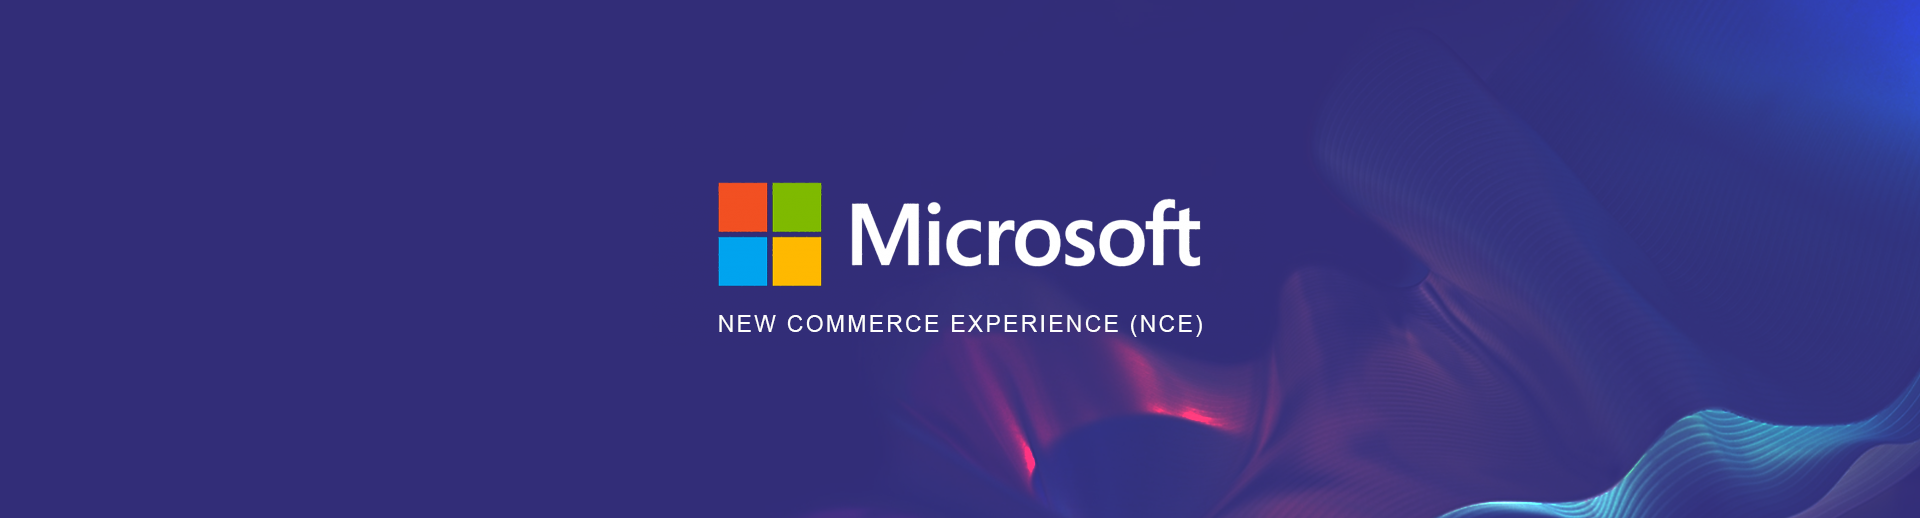 Microsoft New Commerce Experience NCE